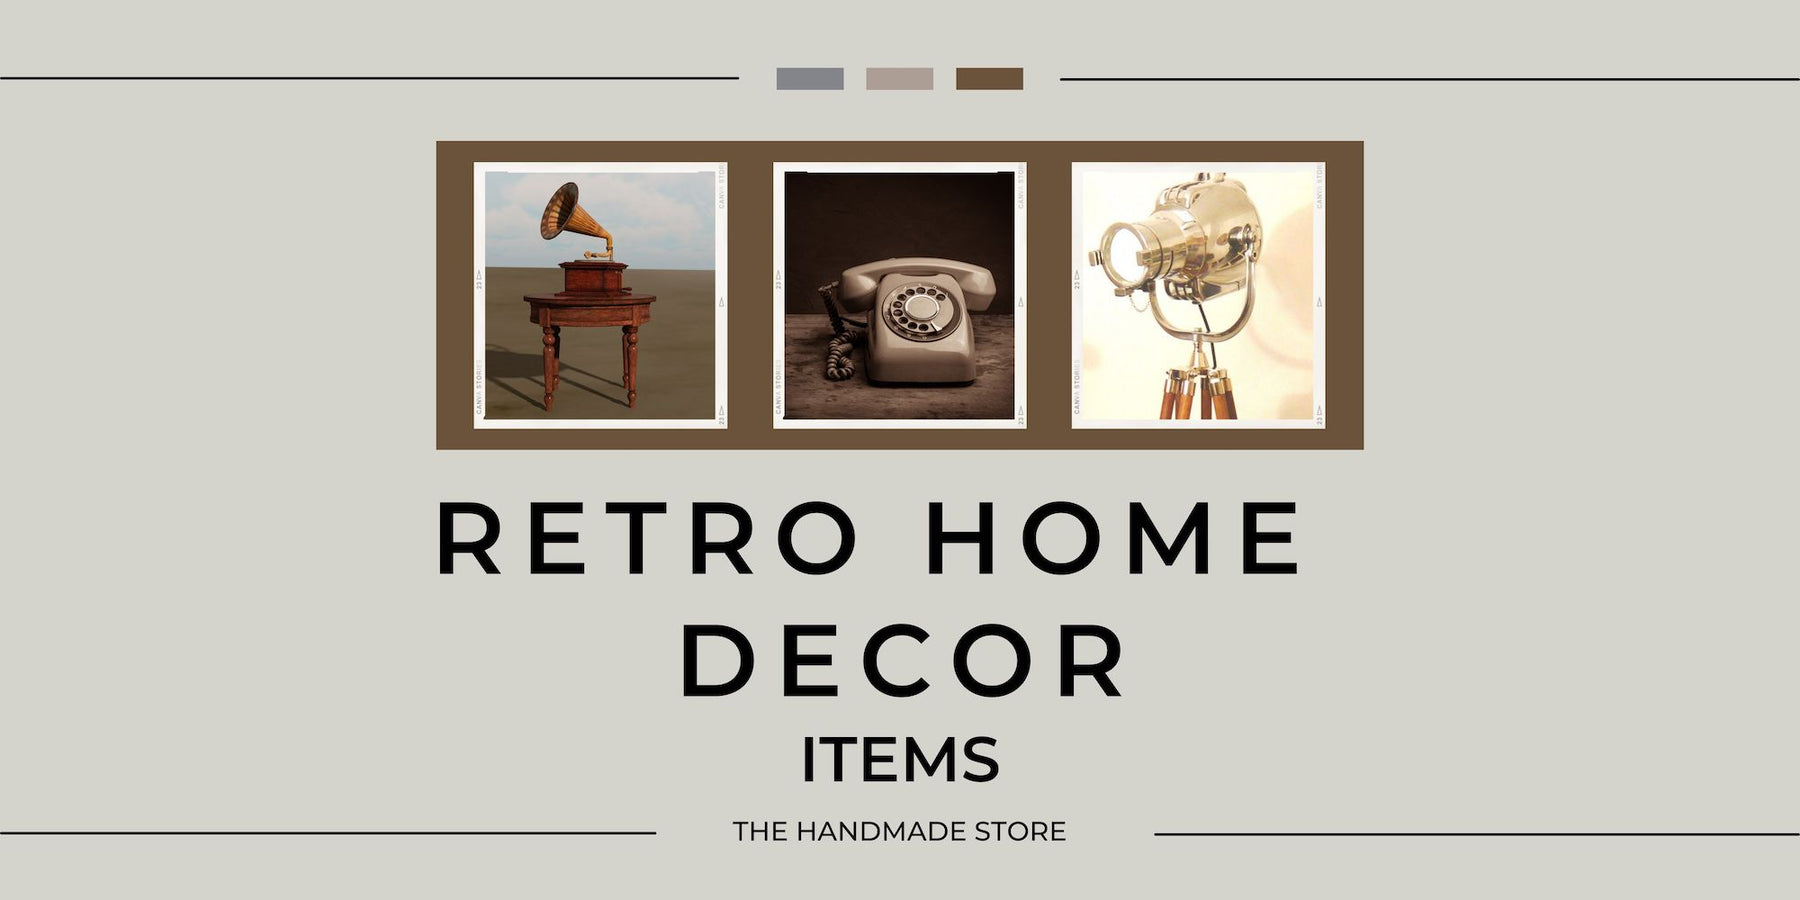 9 Retro Decor Items To Give Your Home 70's Style - The Handmade Store